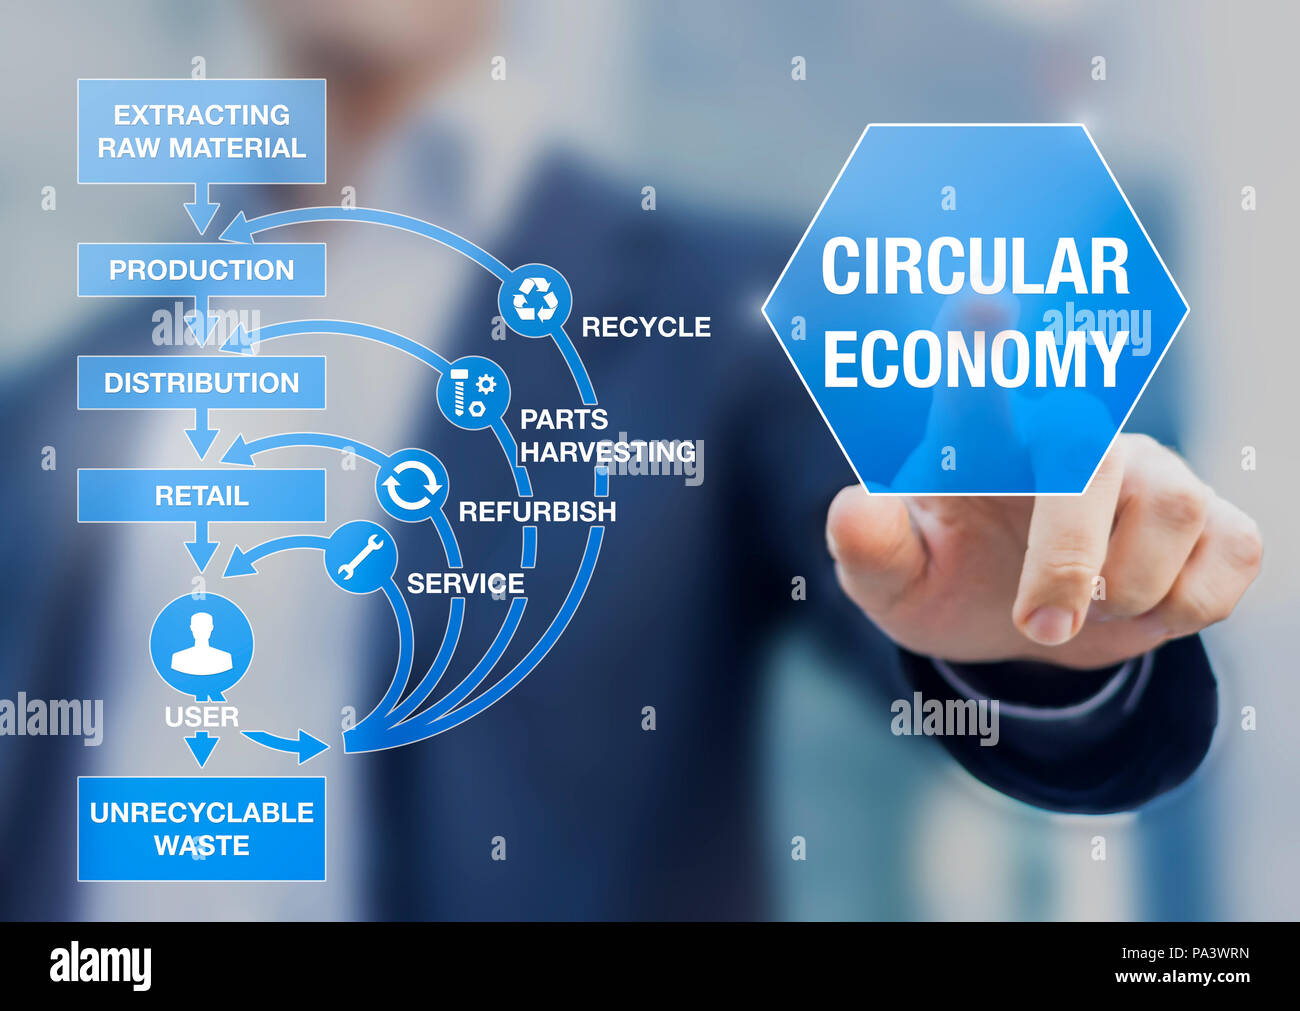 Circular economy business model for sustainable development system, decreasing natural resources needs and waste, recycle, reuse, refurbish, improve p Stock Photo